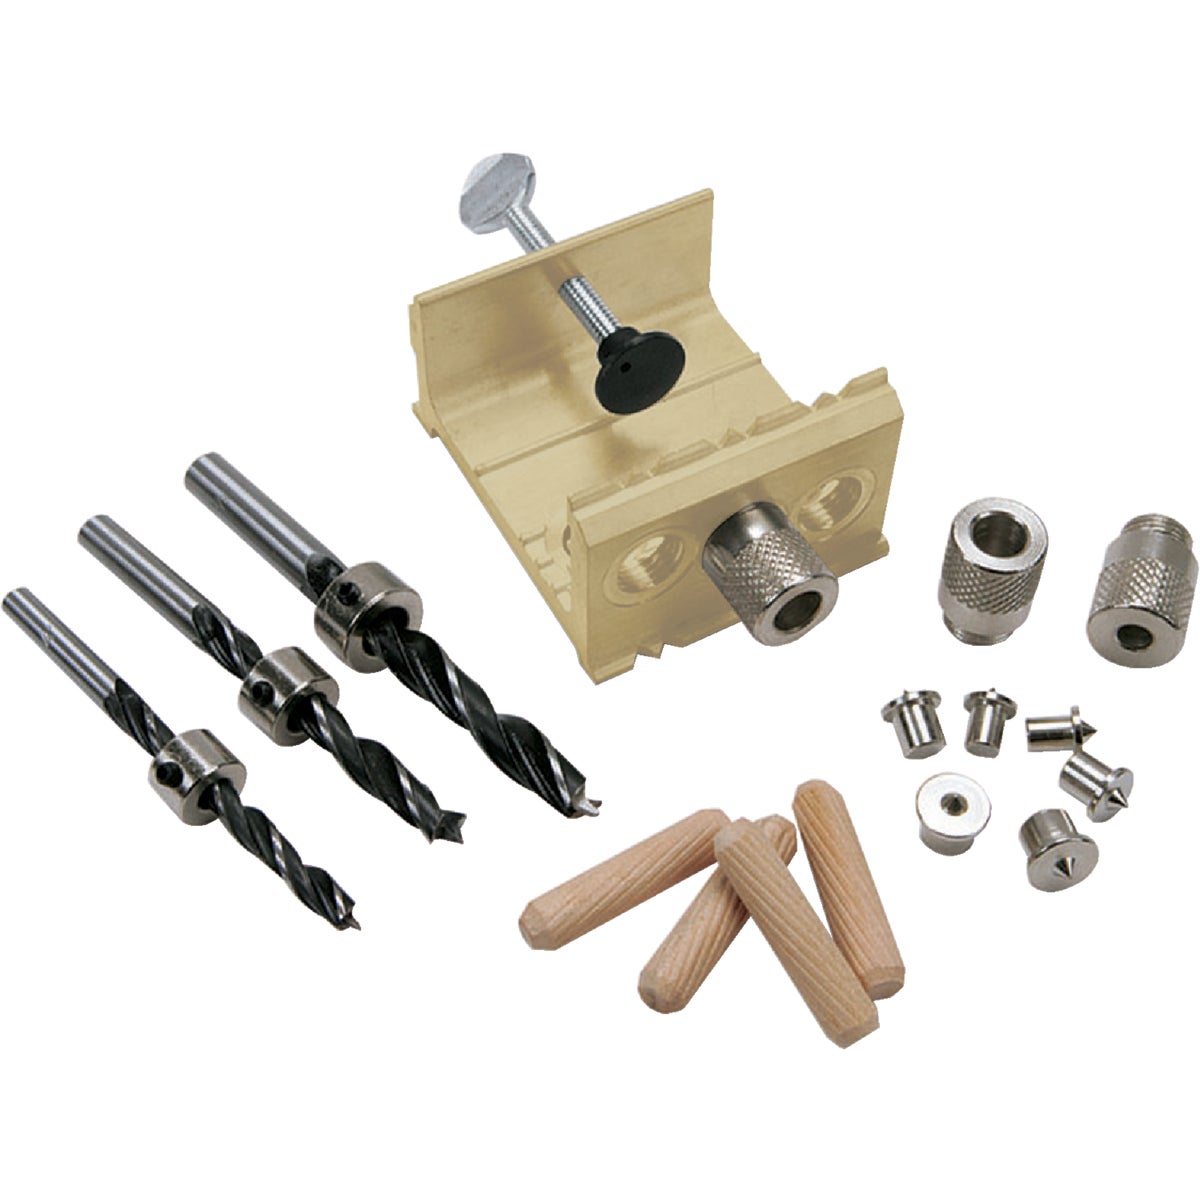 Item 301242, The General Tools E-Z Pro Doweling Jig Kit is the perfect tool for anyone 